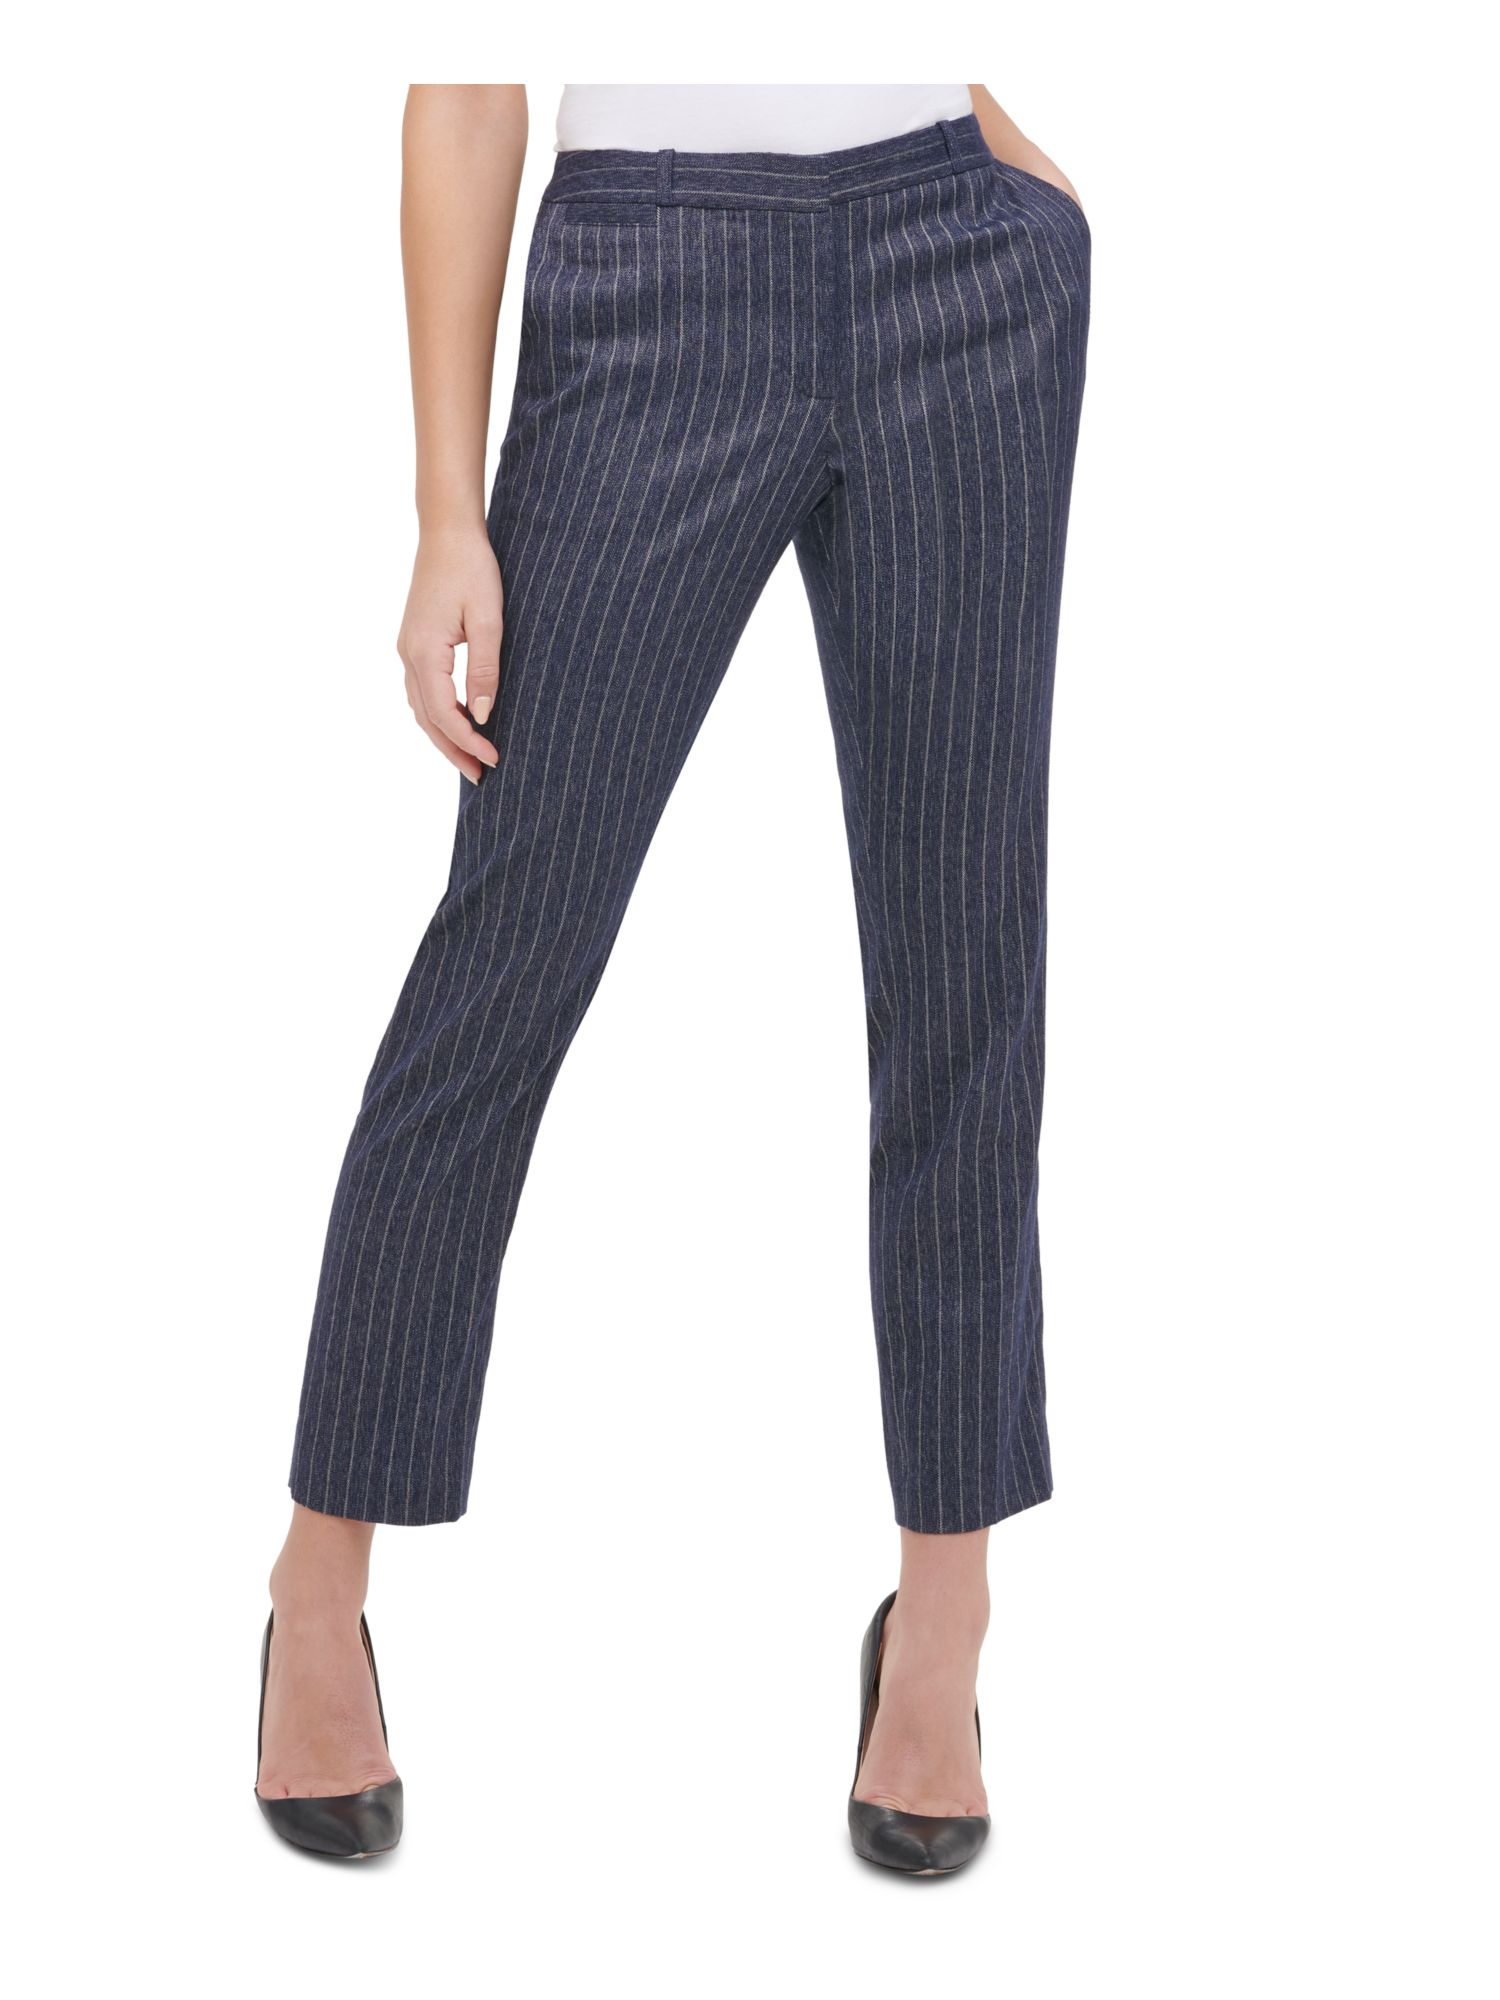 TOMMY HILFIGER Womens Navy Zippered Pinstripe Pants Size: 12 - image 1 of 4